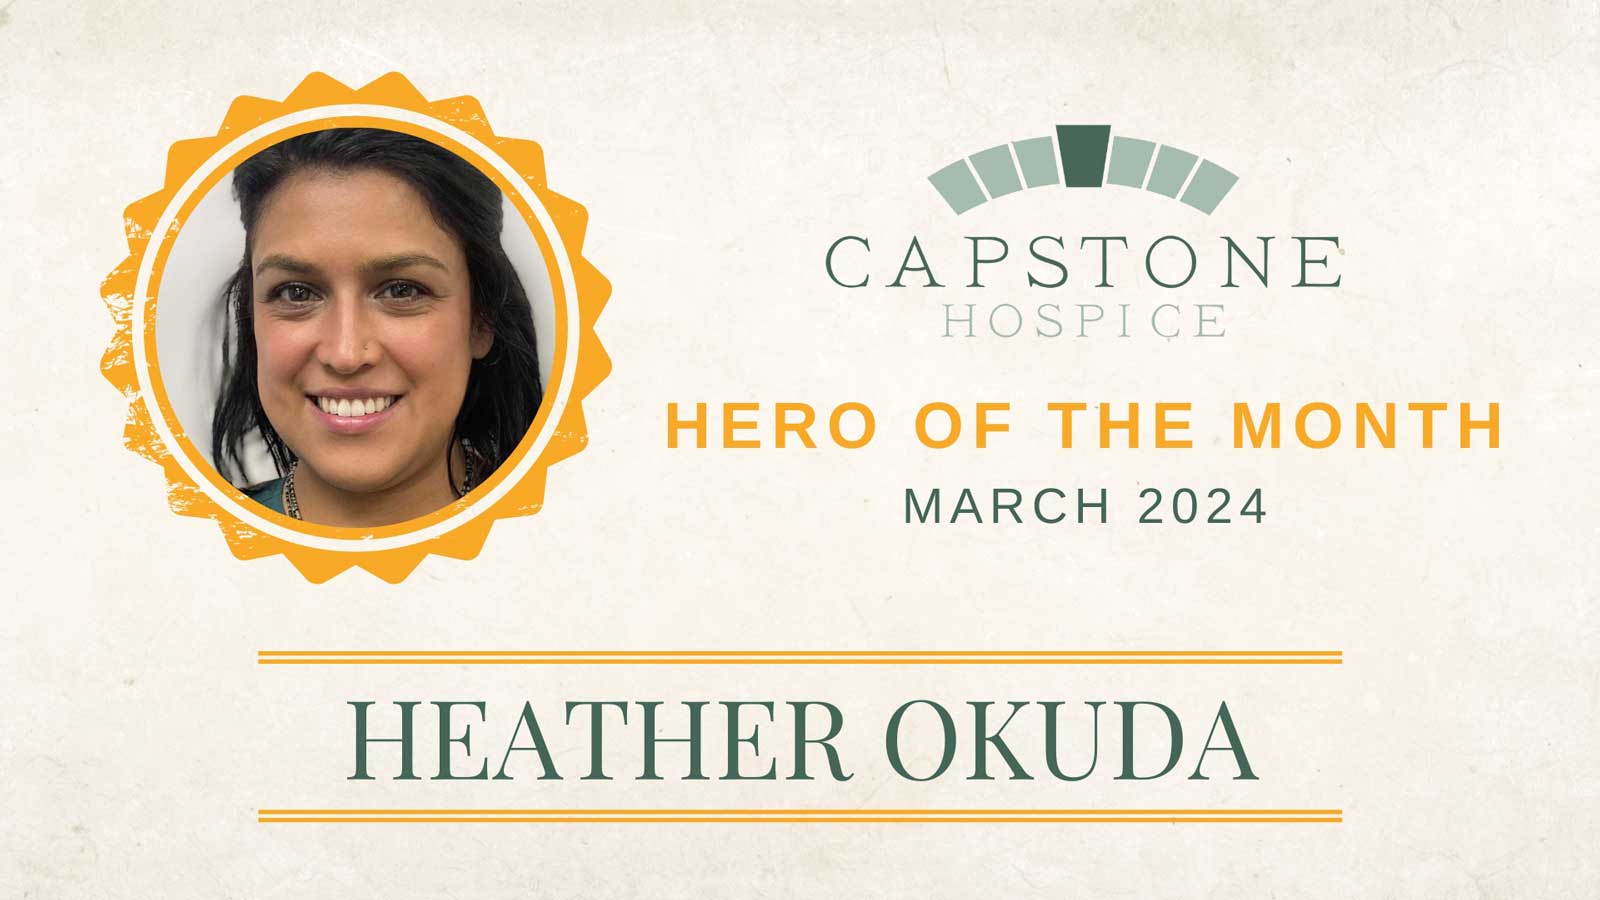 Hero of the Month March 2024 Certificate for Heather Okuda